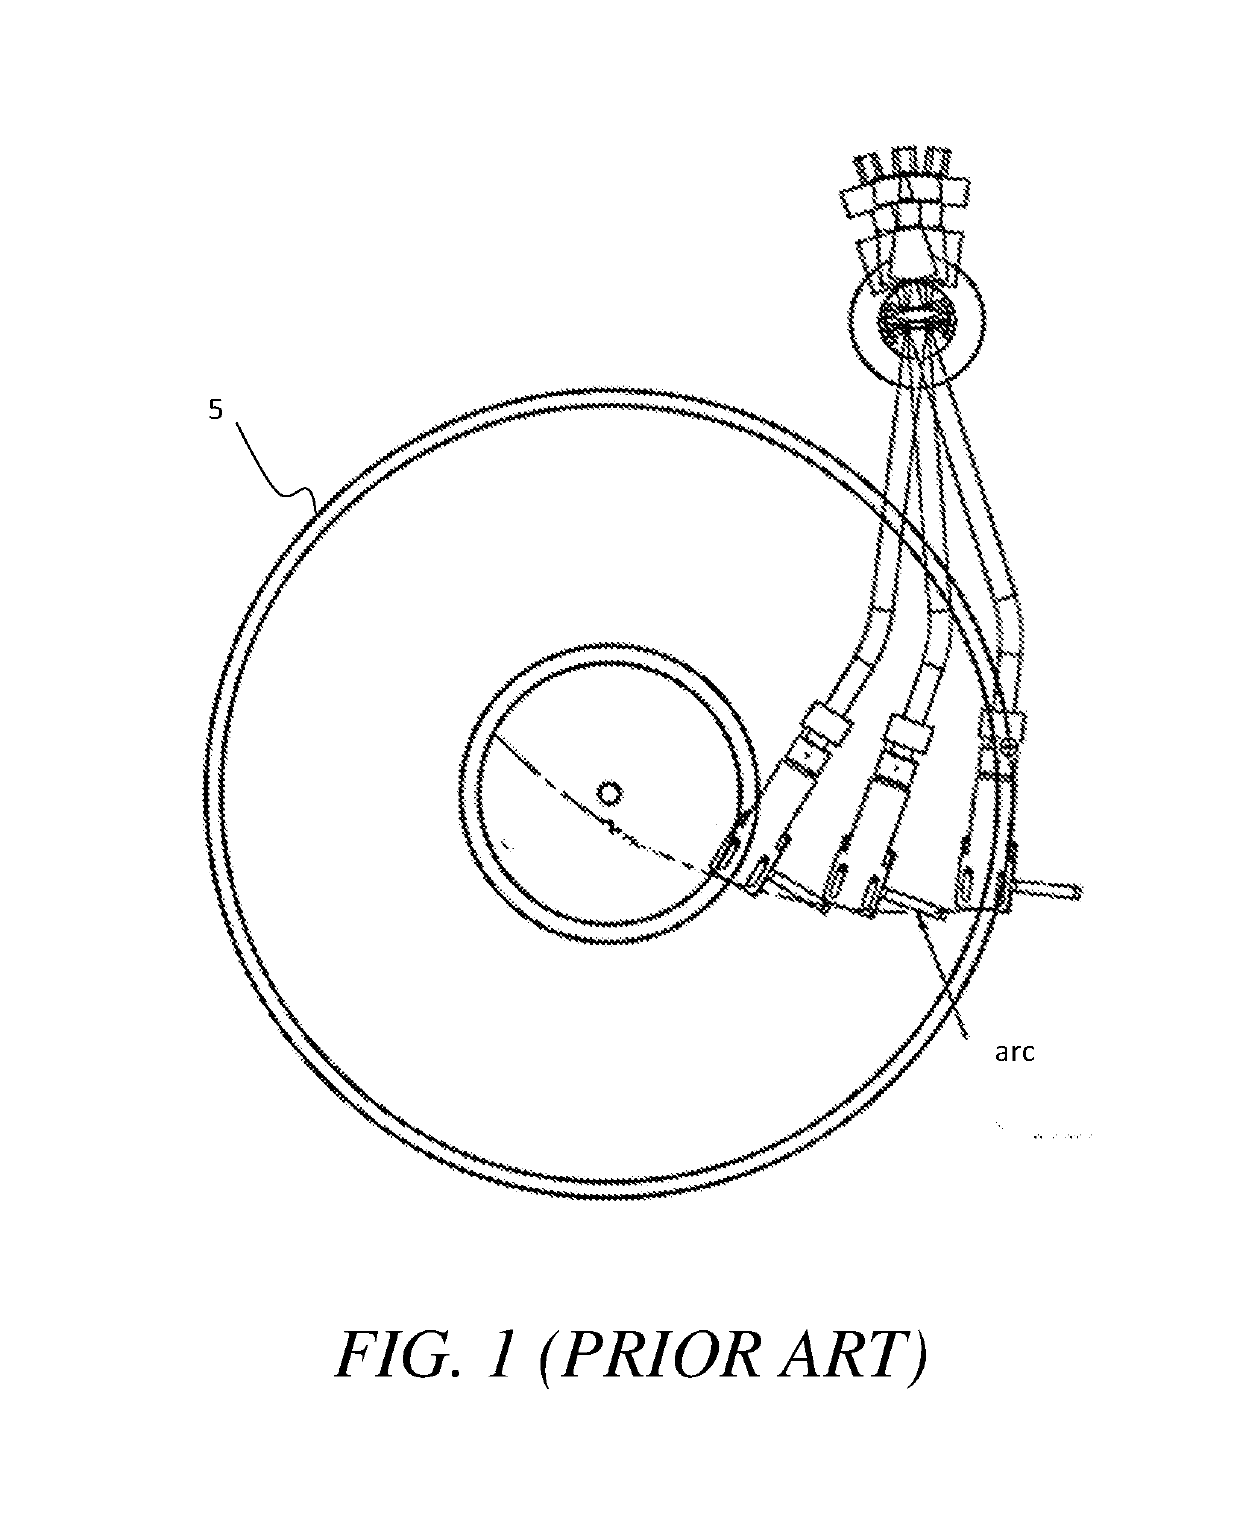 Apparatus, methods, and systems for achieving linear tonearm tracking for a record turntable